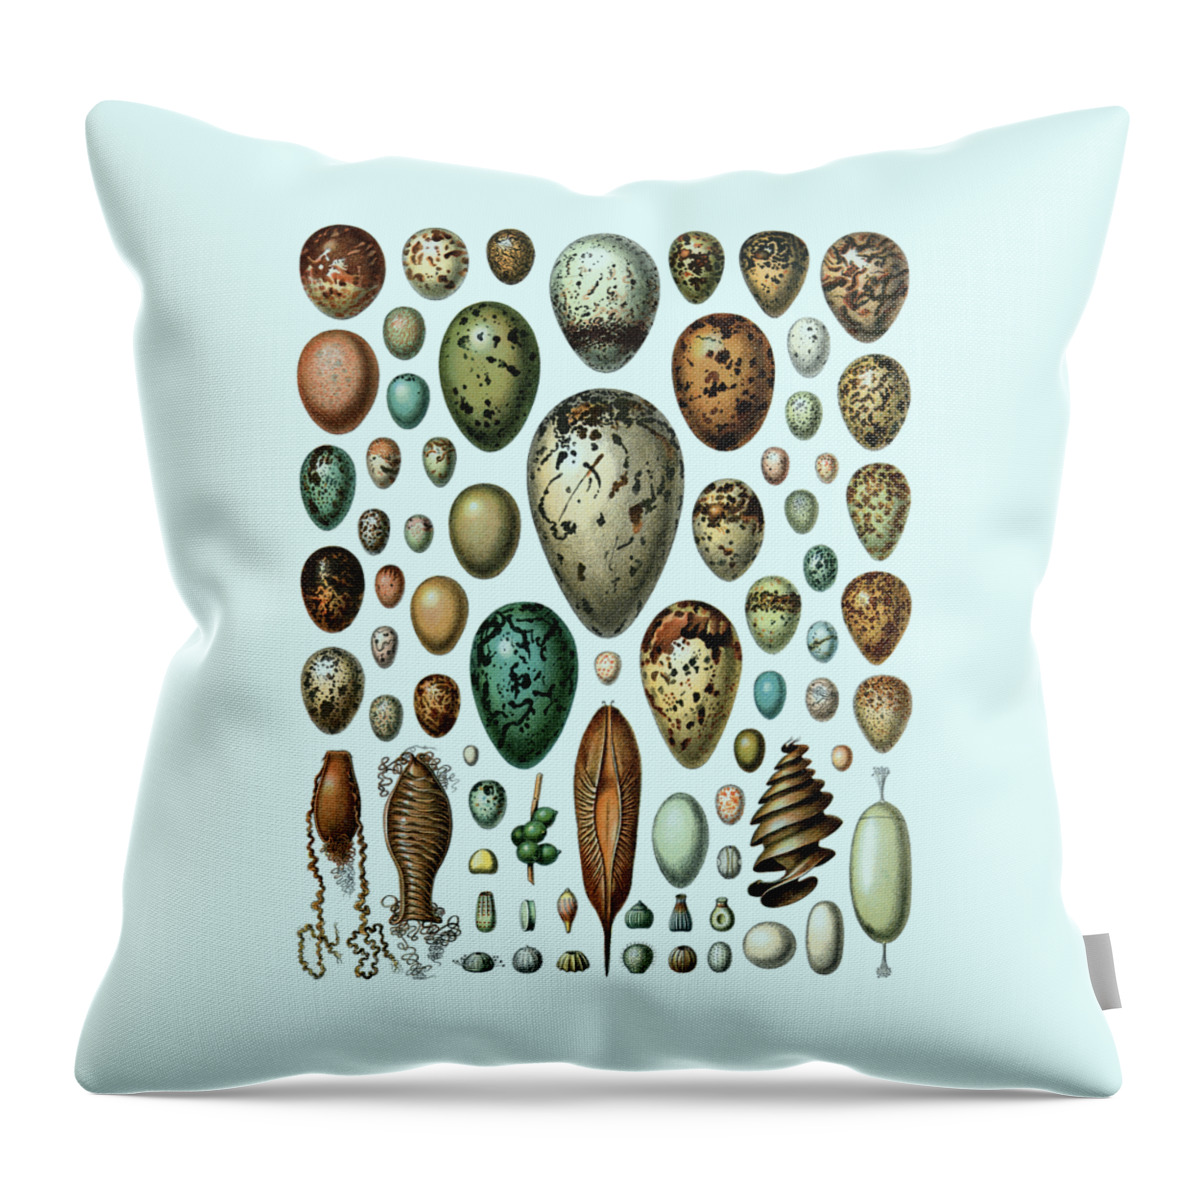 Egg Throw Pillow featuring the digital art Eggs by Madame Memento